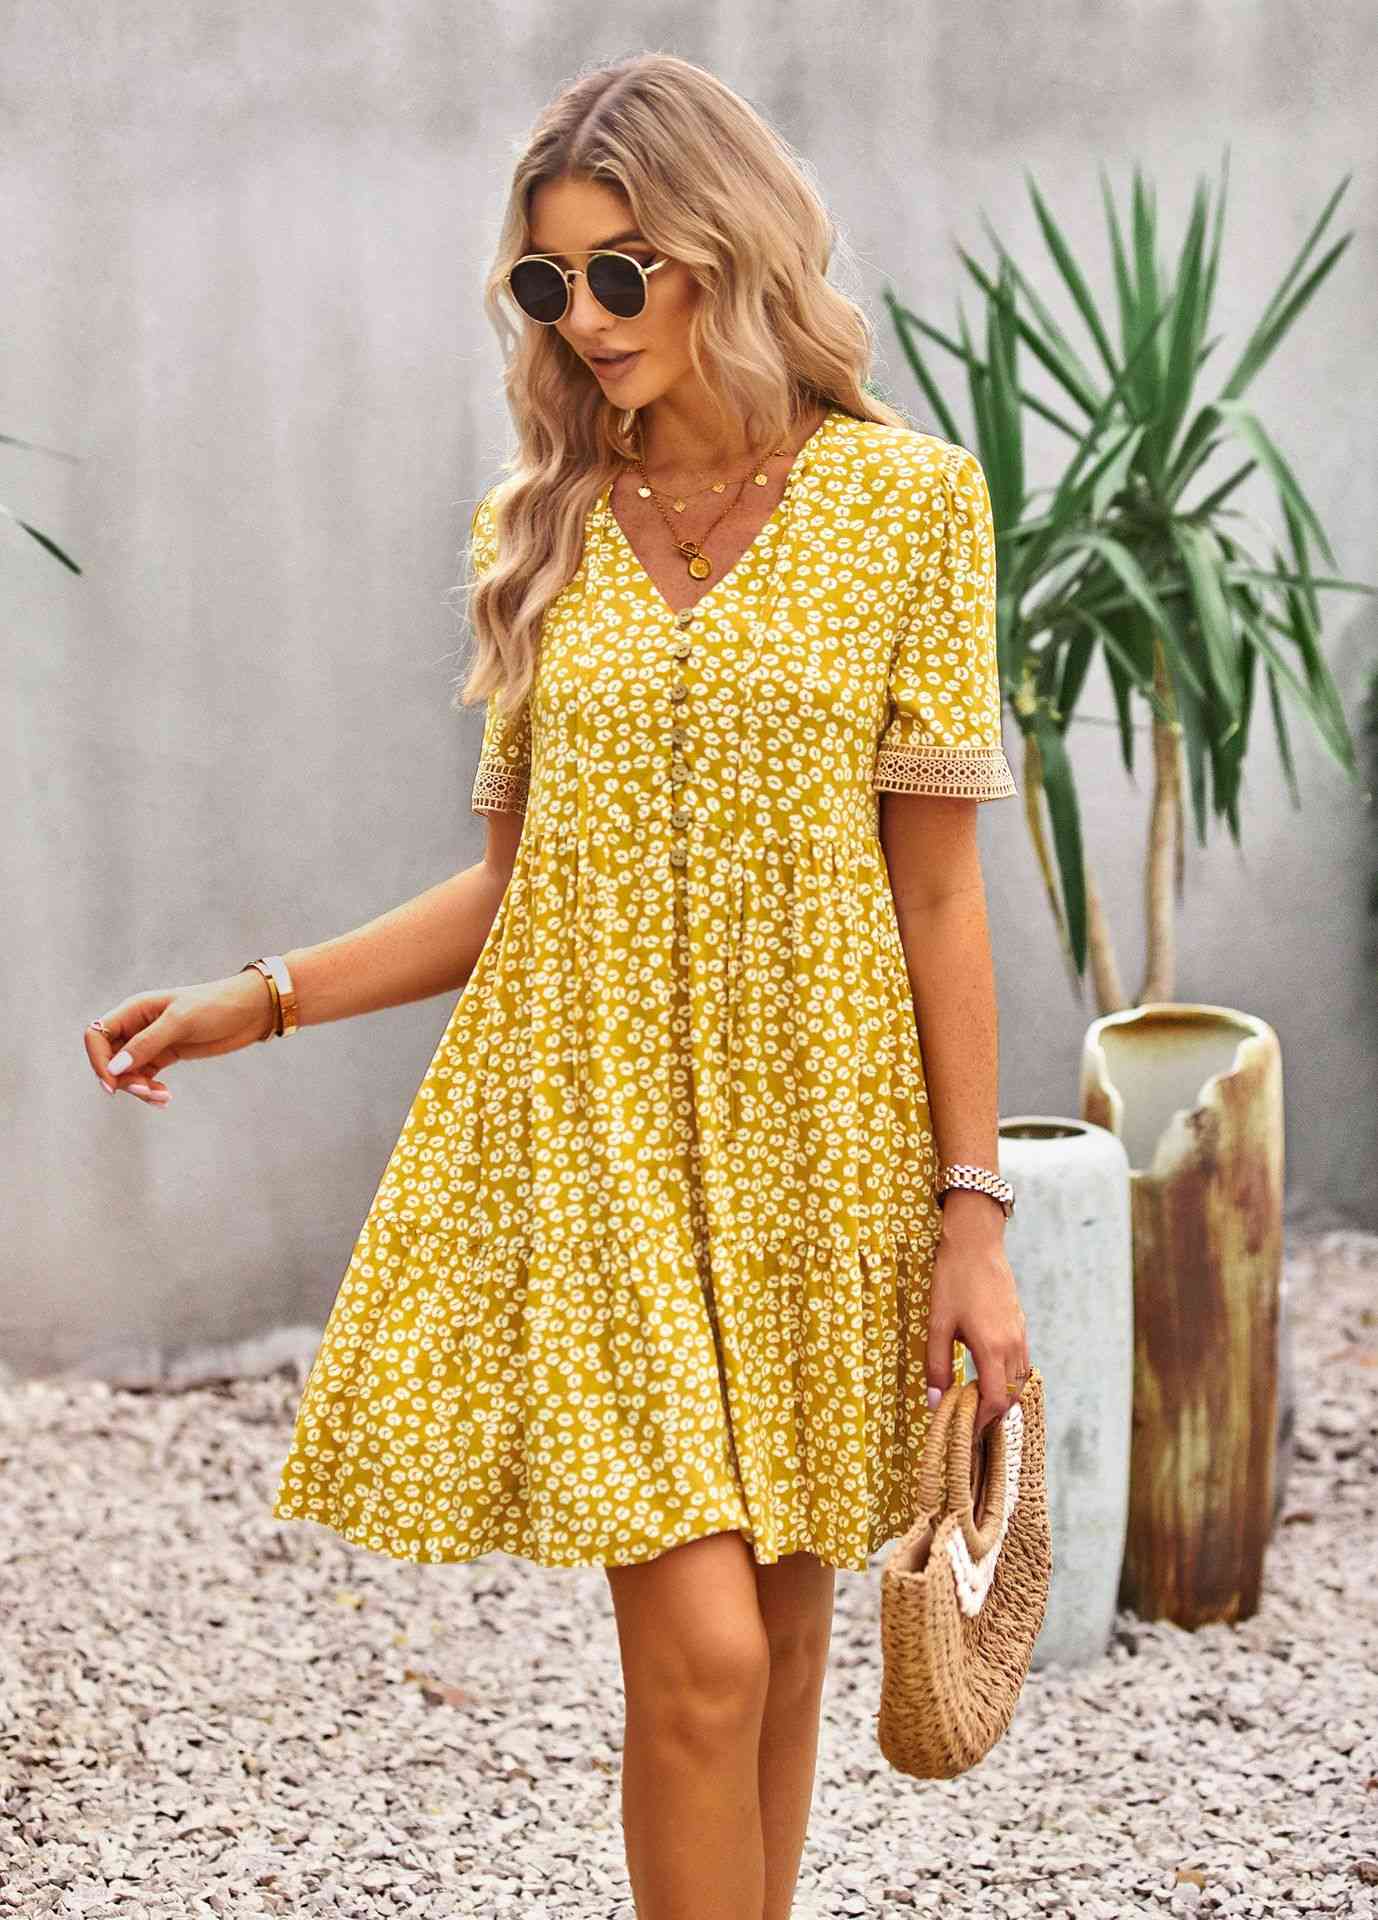 Floral Buttoned Puff Sleeve Dress (2 Colors)  Krazy Heart Designs Boutique   